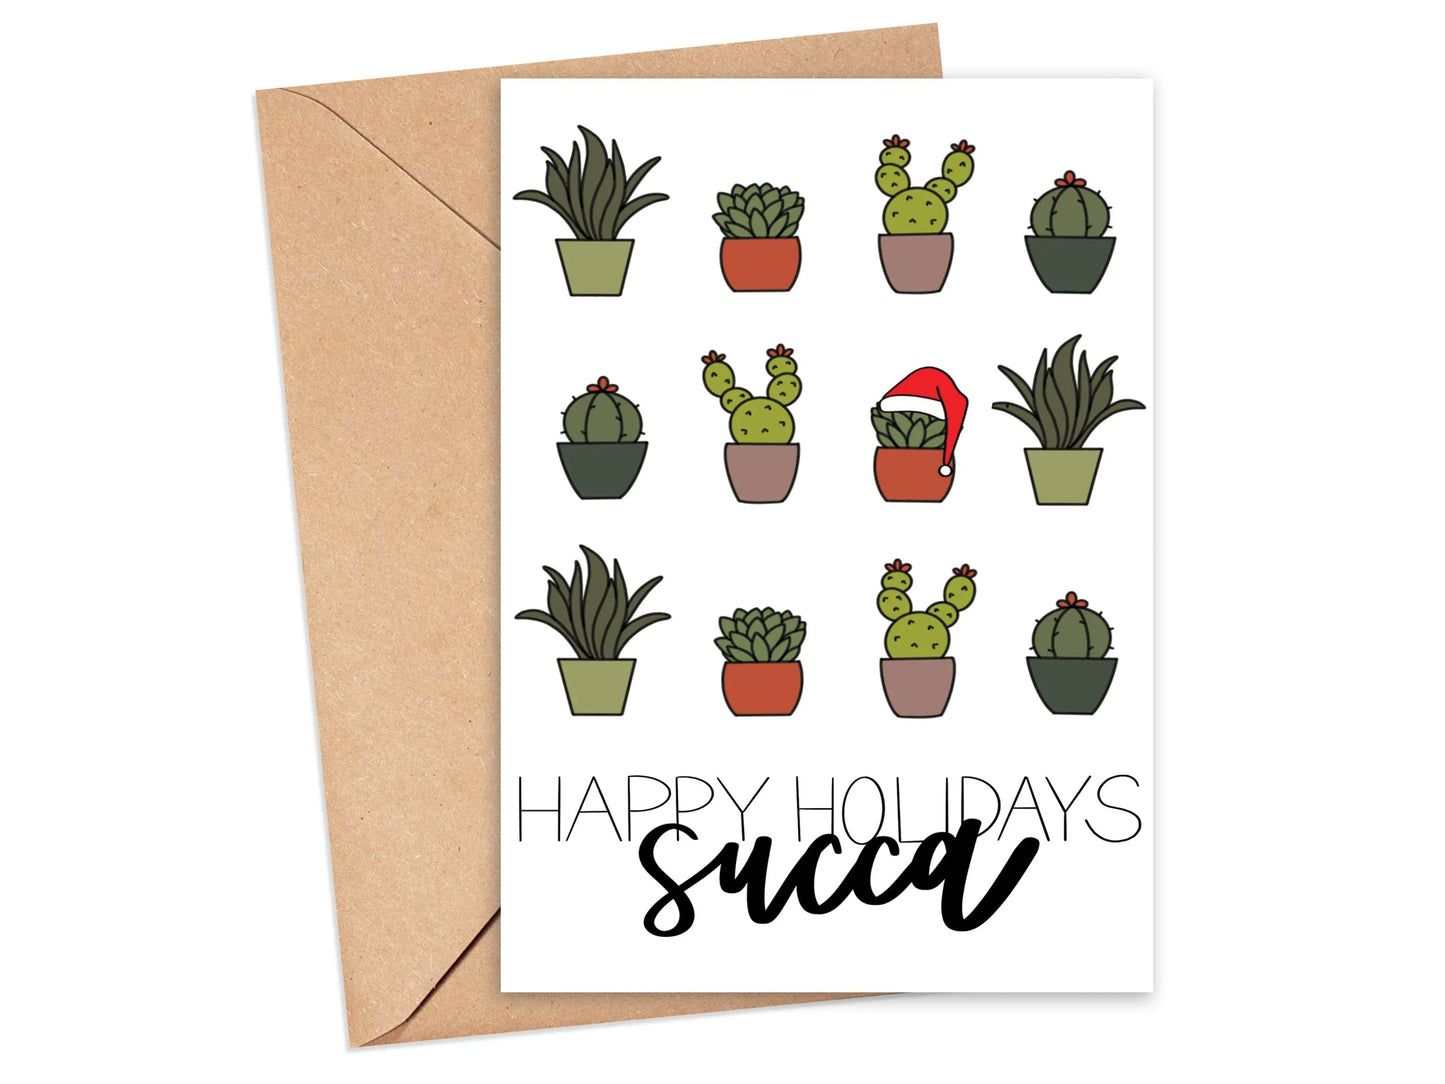 Happy Holidays Succa Card Simply Happy Cards